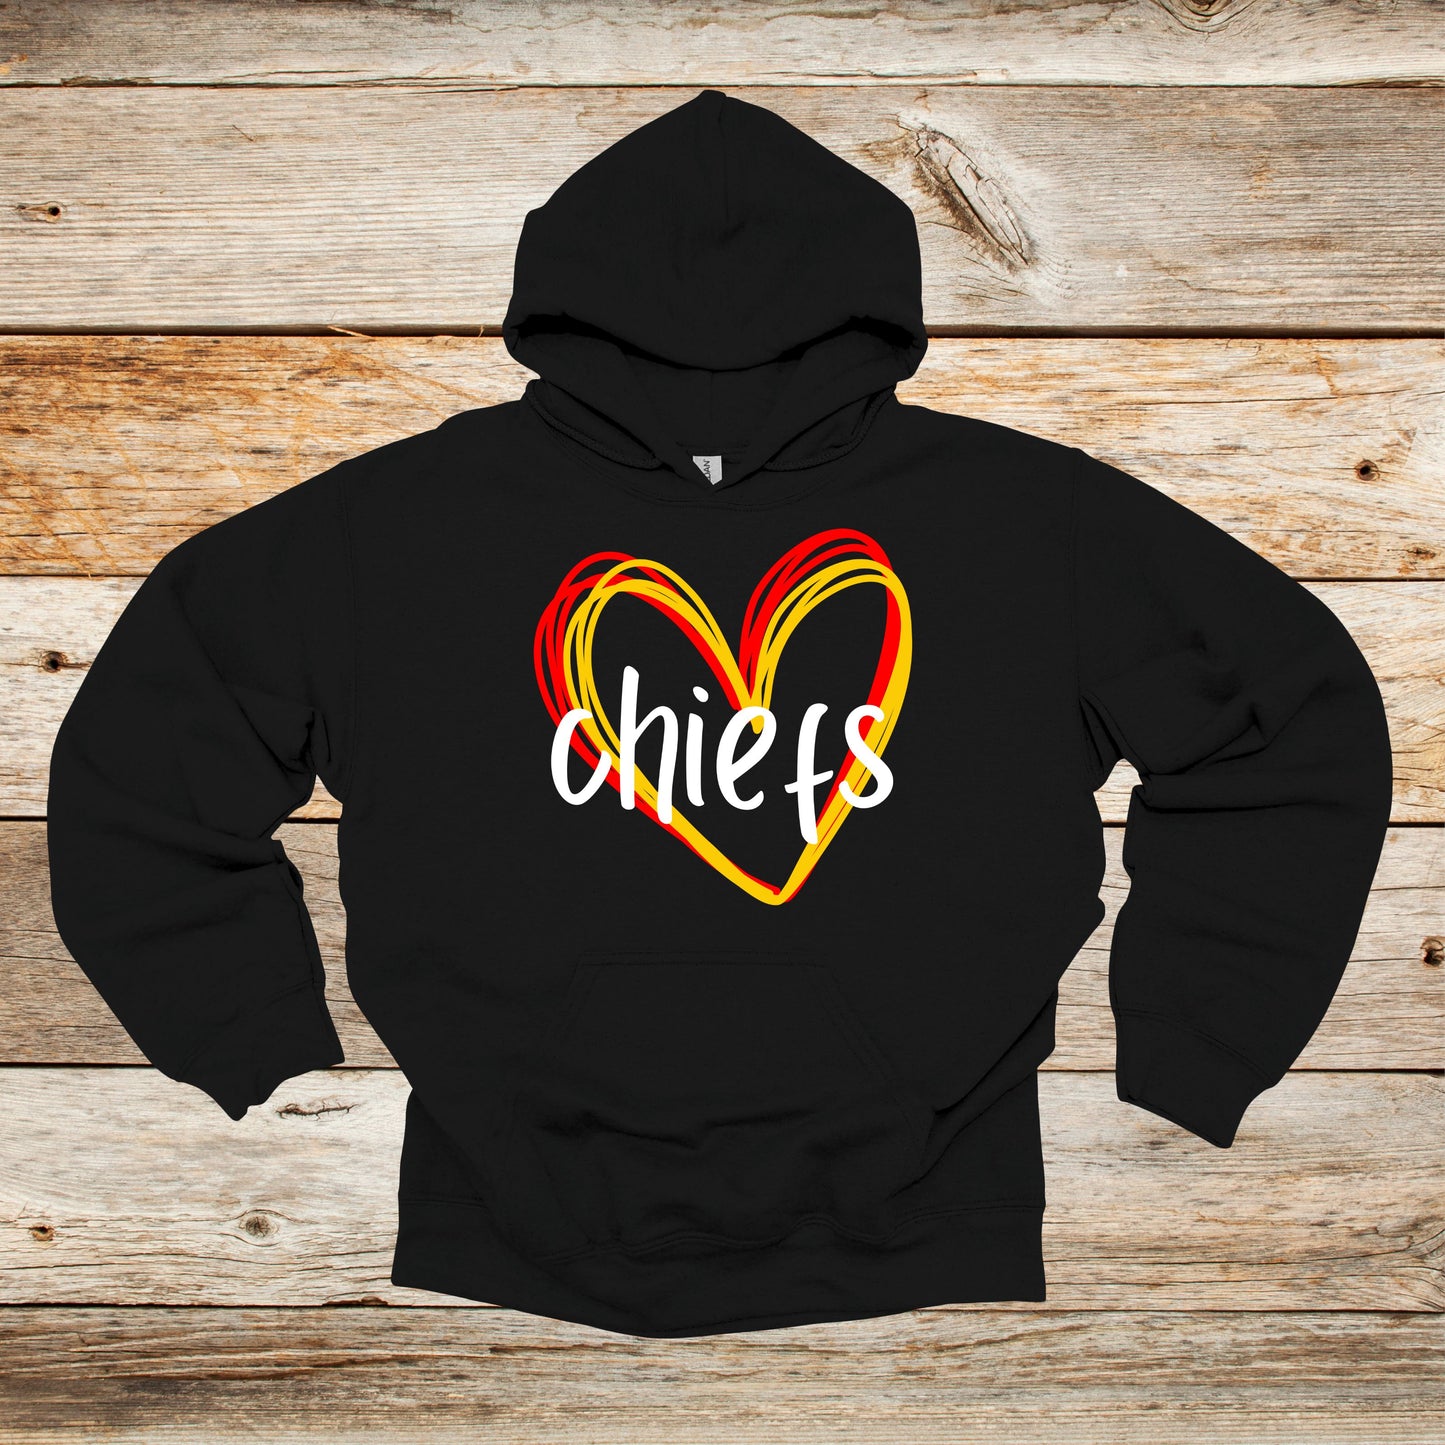 Football Crewneck and Hooded Sweatshirt - Chiefs Football - Adult and Children's Tee Shirts - Sports Hooded Sweatshirt Graphic Avenue Hooded Sweatshirt Black Adult Small